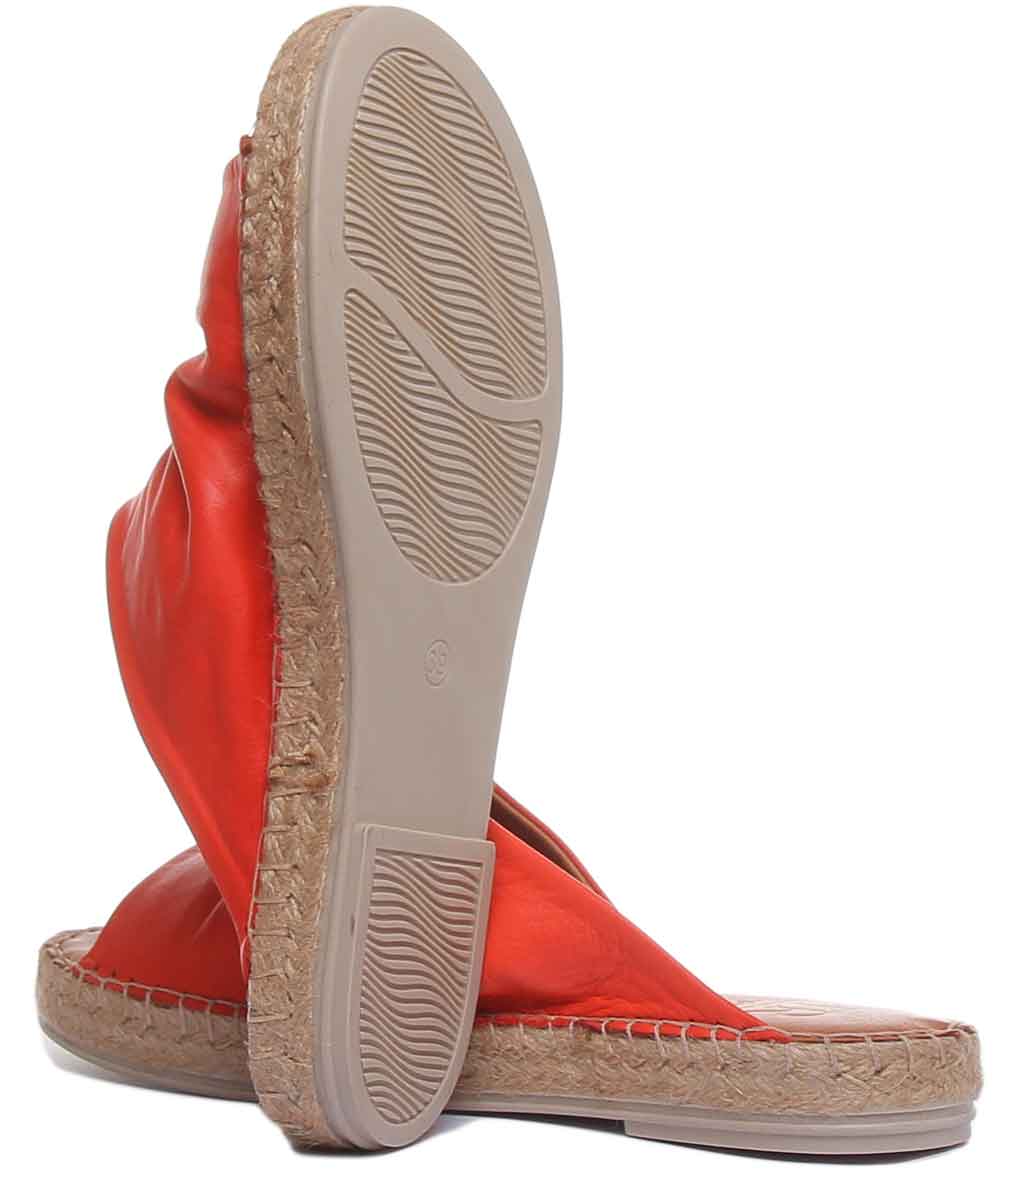 JUST REESS Aliyah Rote Sandale des weichen Maultiers Espadrille